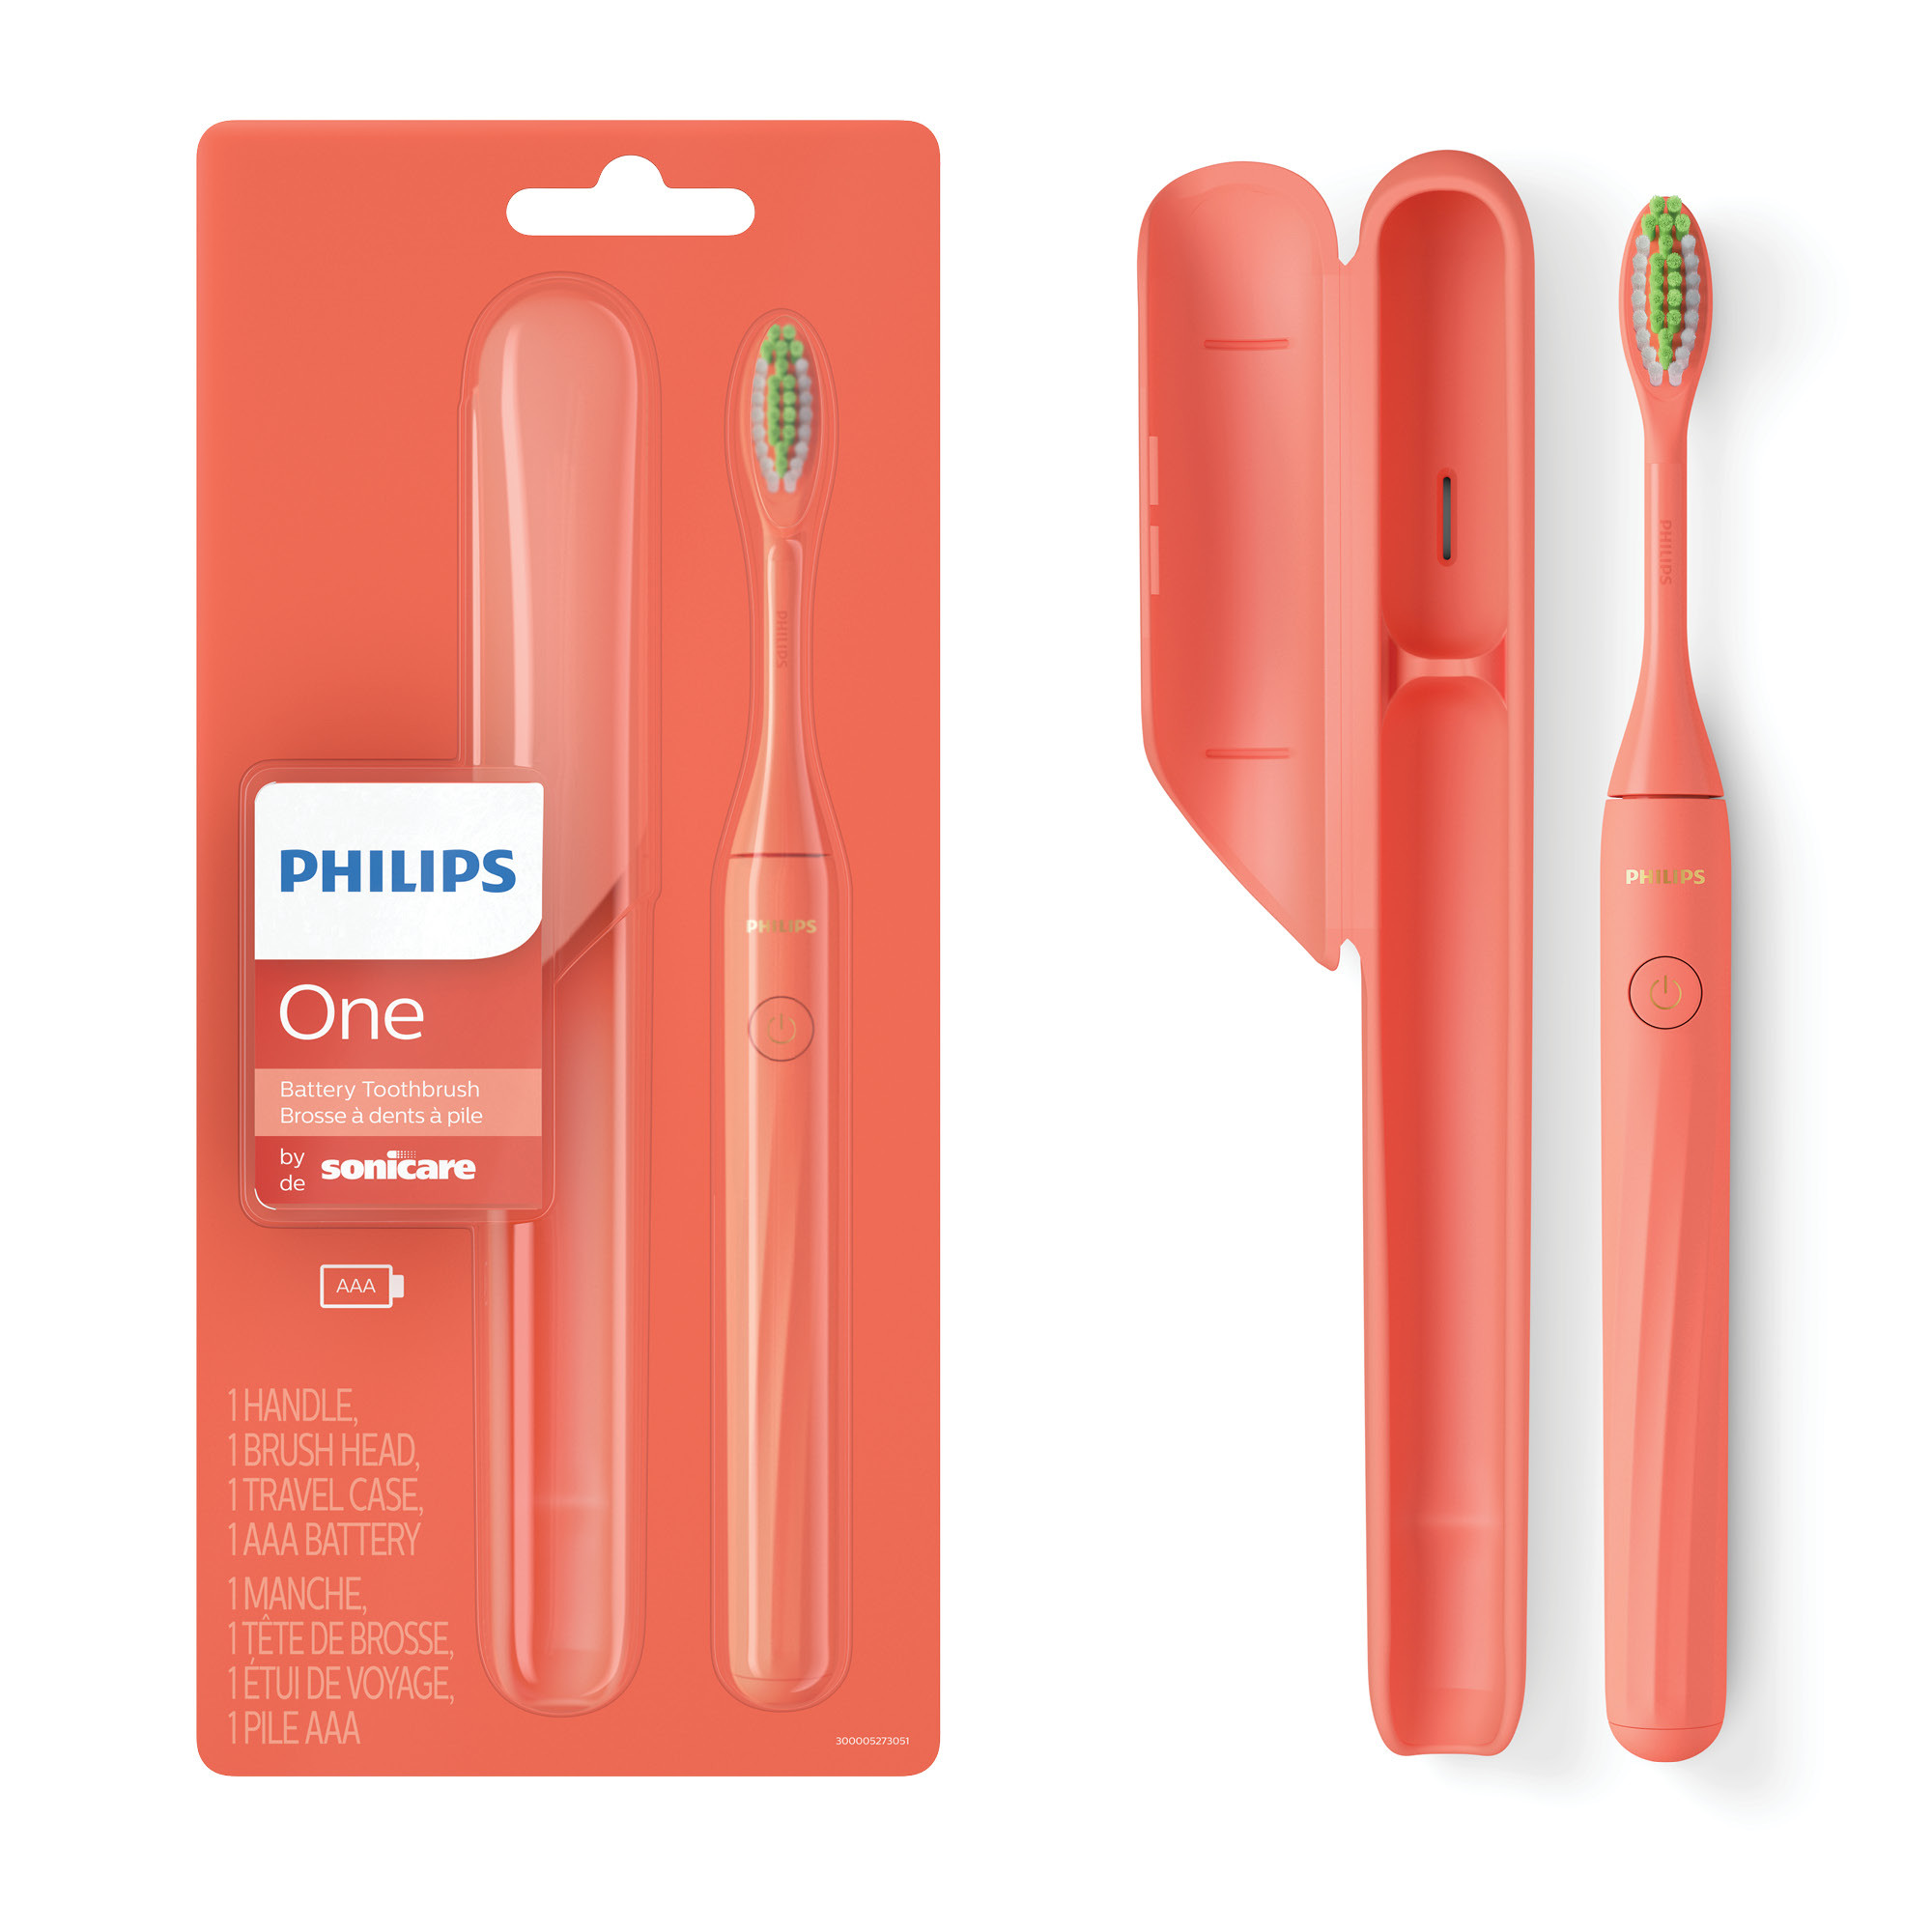 Philips One By Sonicare Battery Toothbrush, Miami Coral, HY1100/01 - image 1 of 15